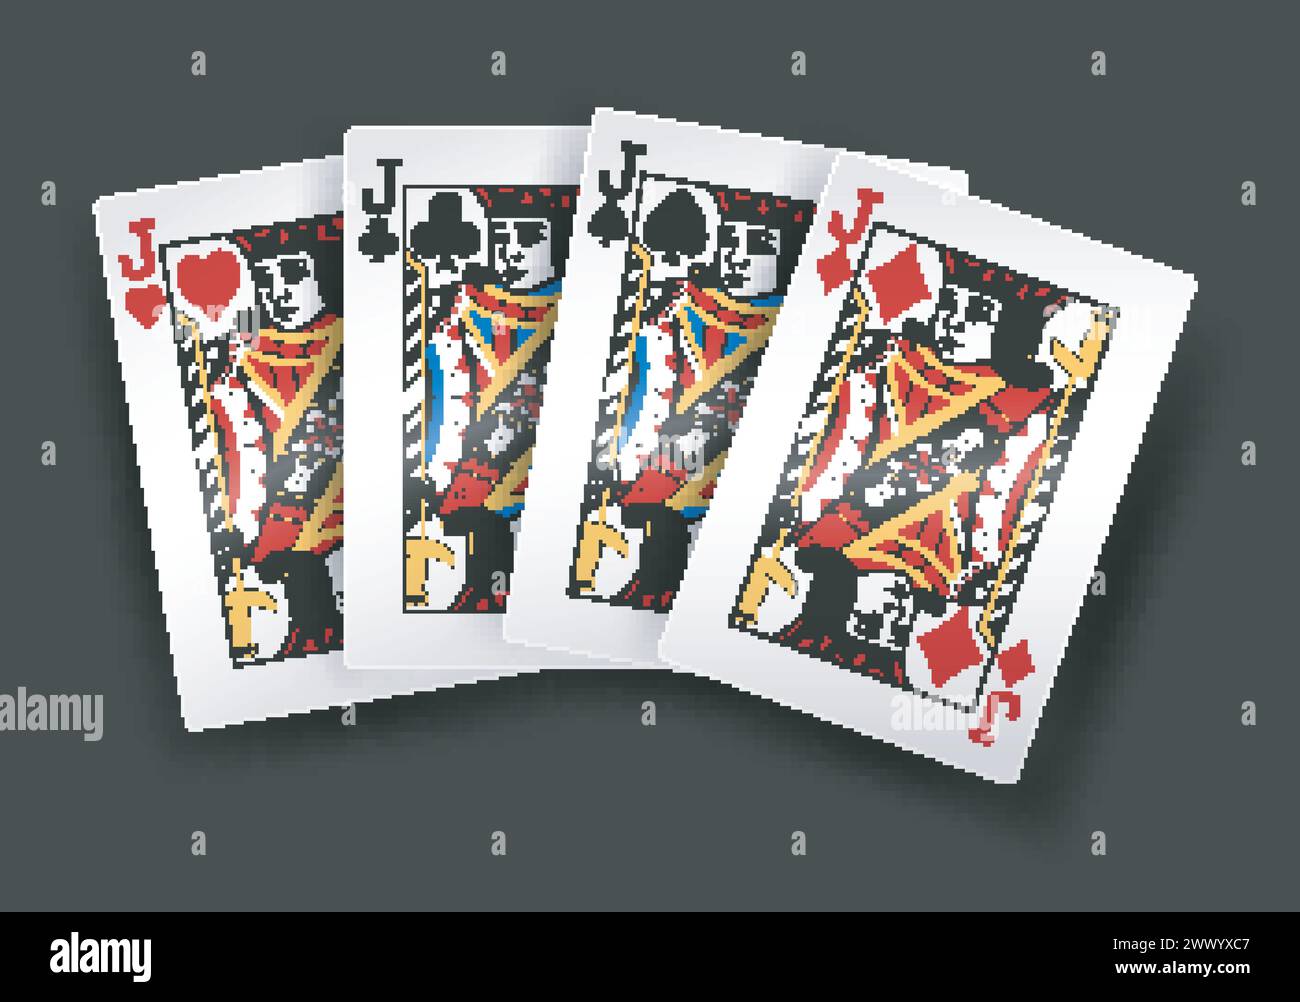 4 Of A Kind Jacks Poker Playing Card, Vector Illustration Stock Vector